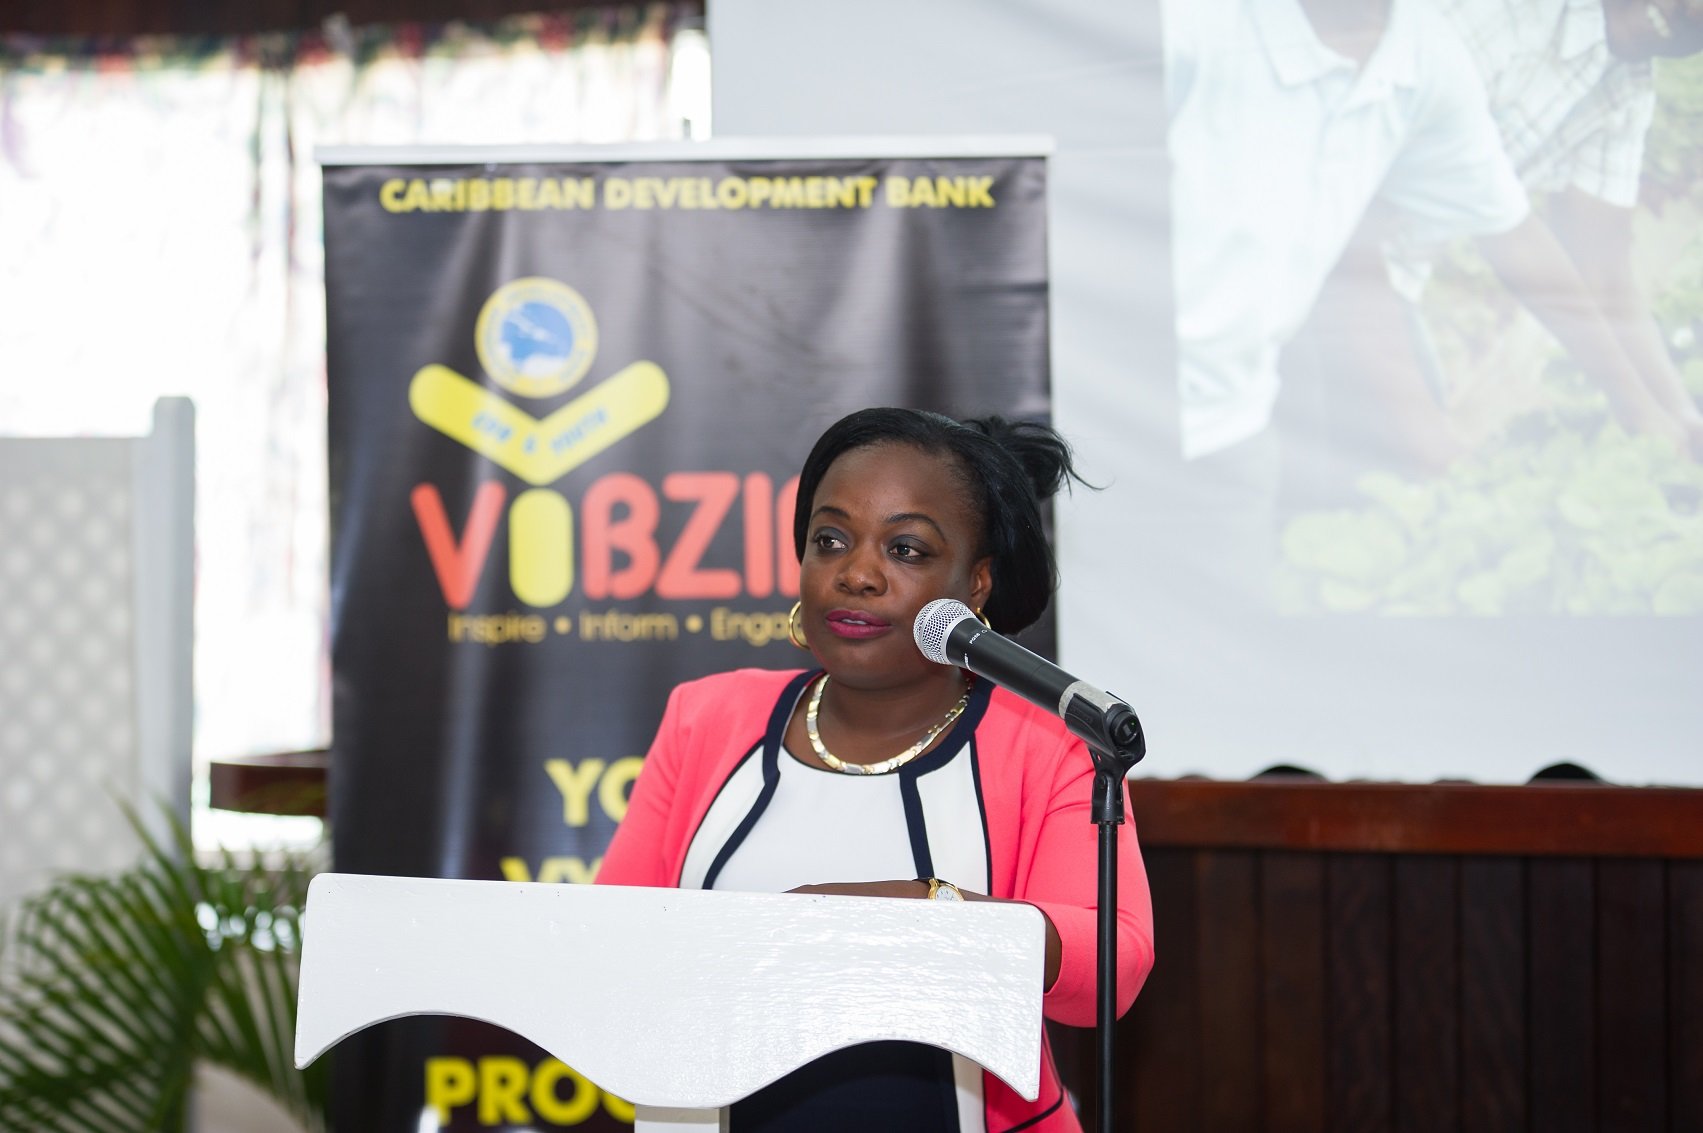 The Hon. Kate Lewis, Minister within the Ministry of Youth Development, Sports, Culture and the Arts, Grenada, thanked CDB and the youth for playing a role in building a more climate-smart agriculture sector in Grenada during the event.